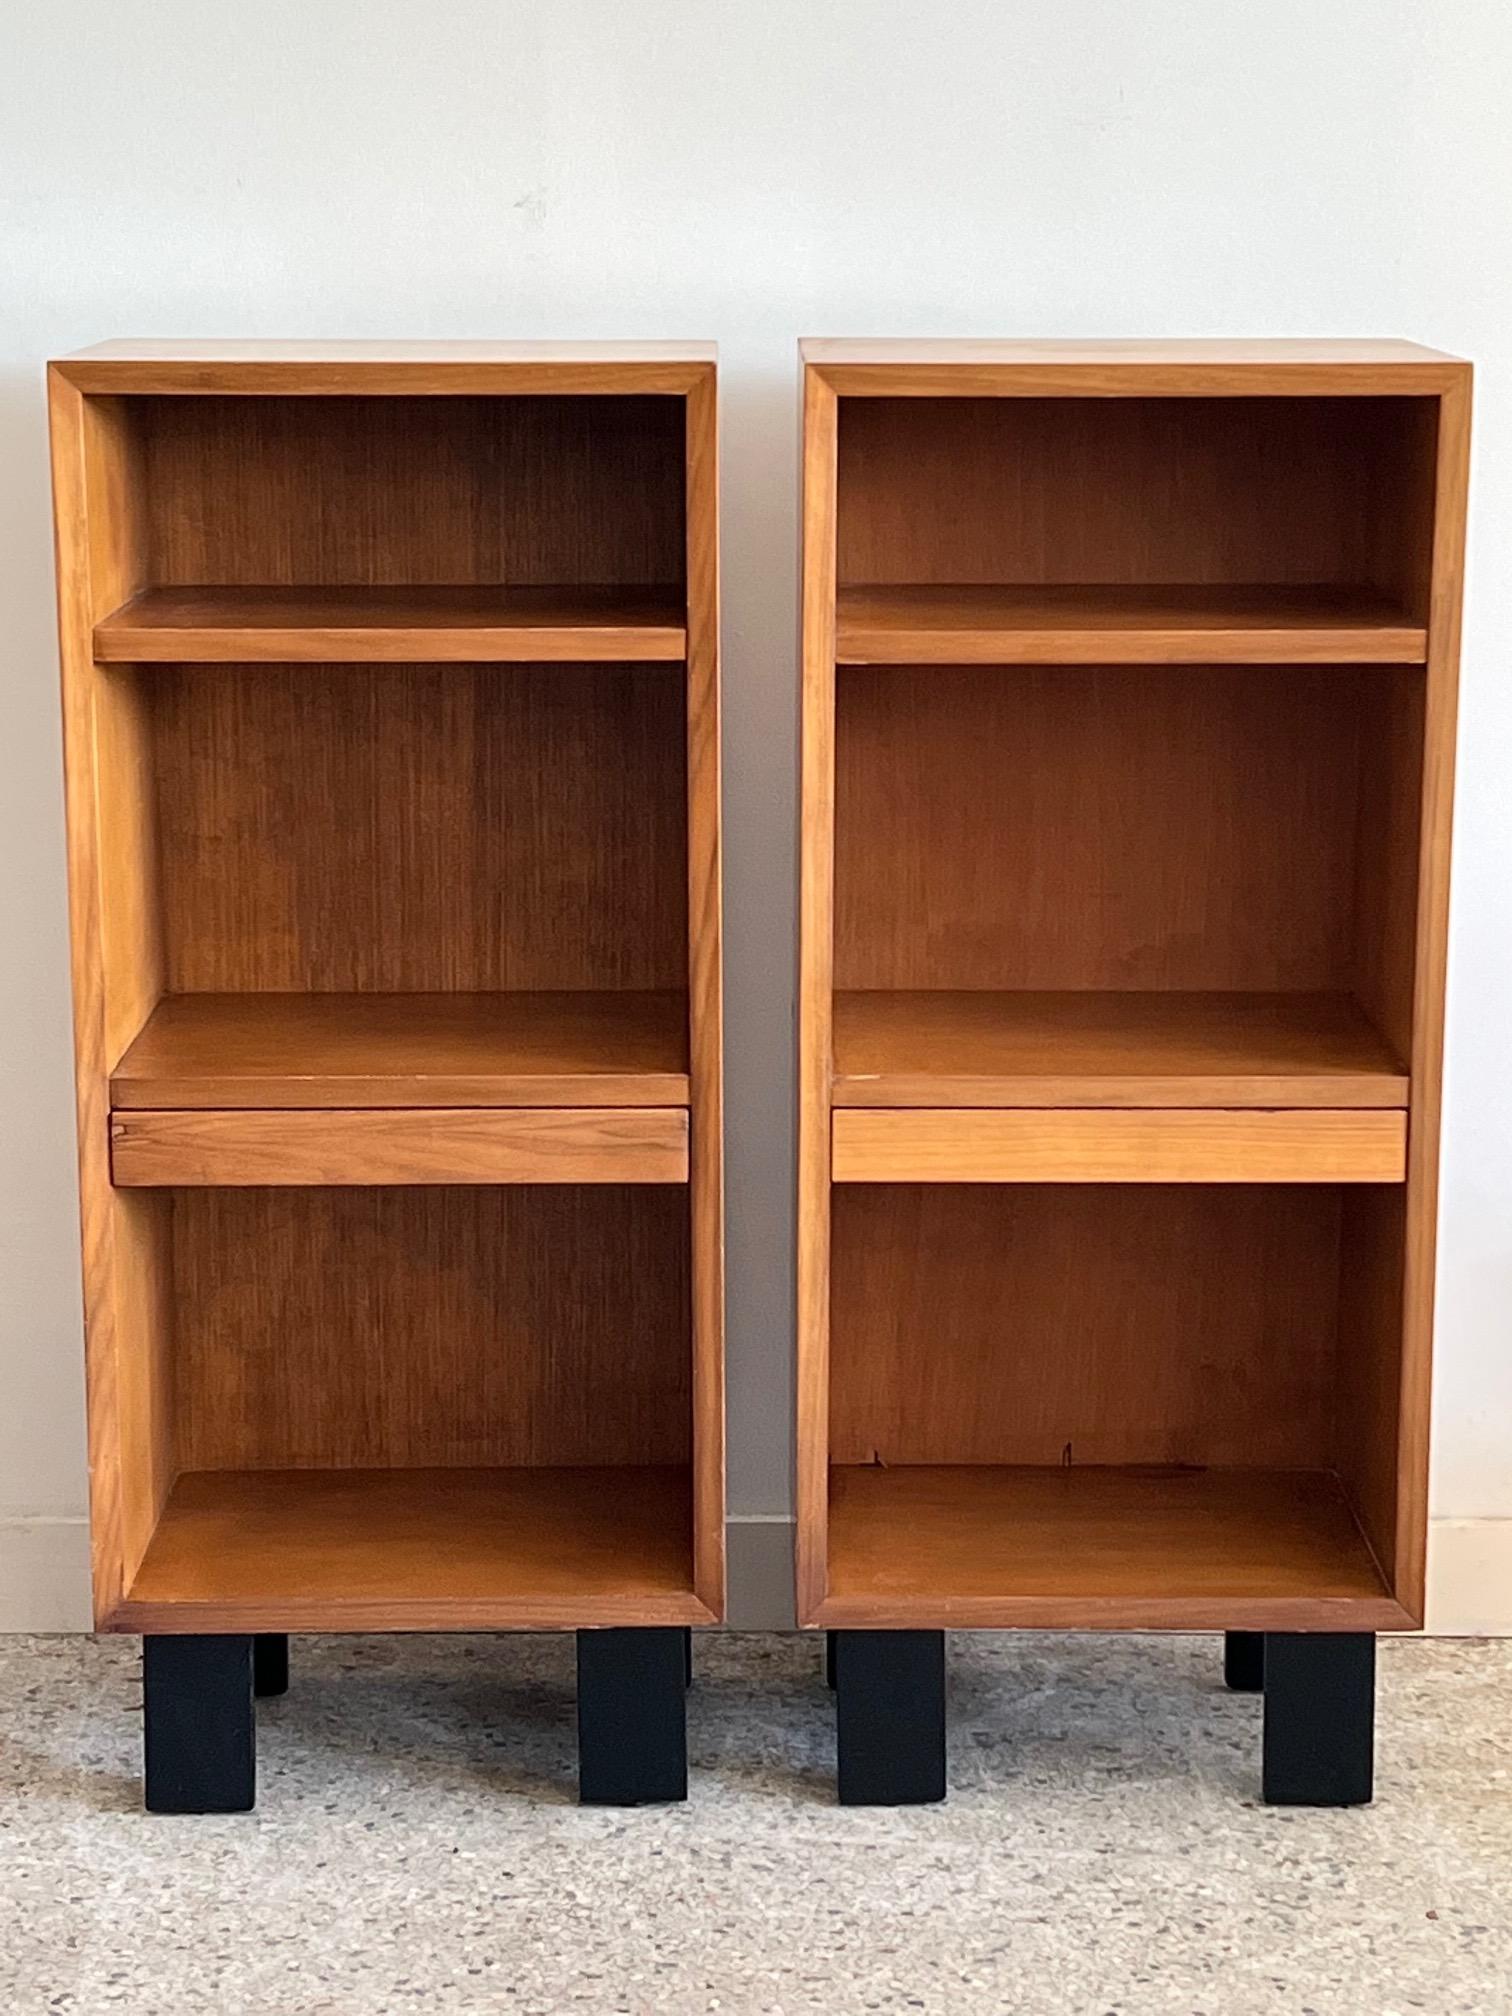 A pair of Classic night stands in walnut by George Nelson for Herman Miller. At close to 40